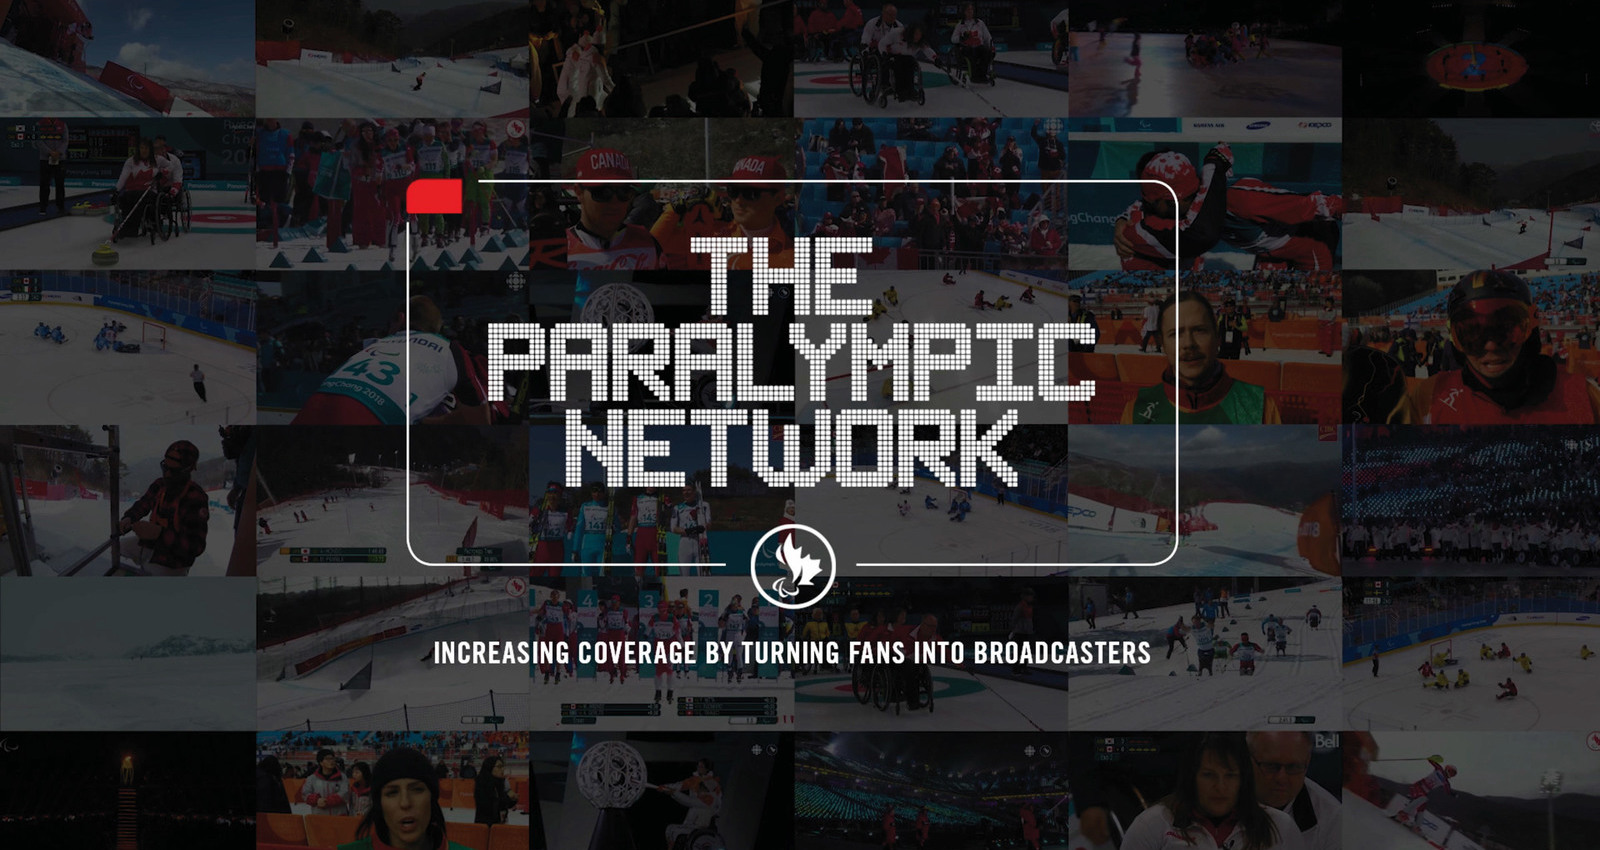 The Paralympic Network